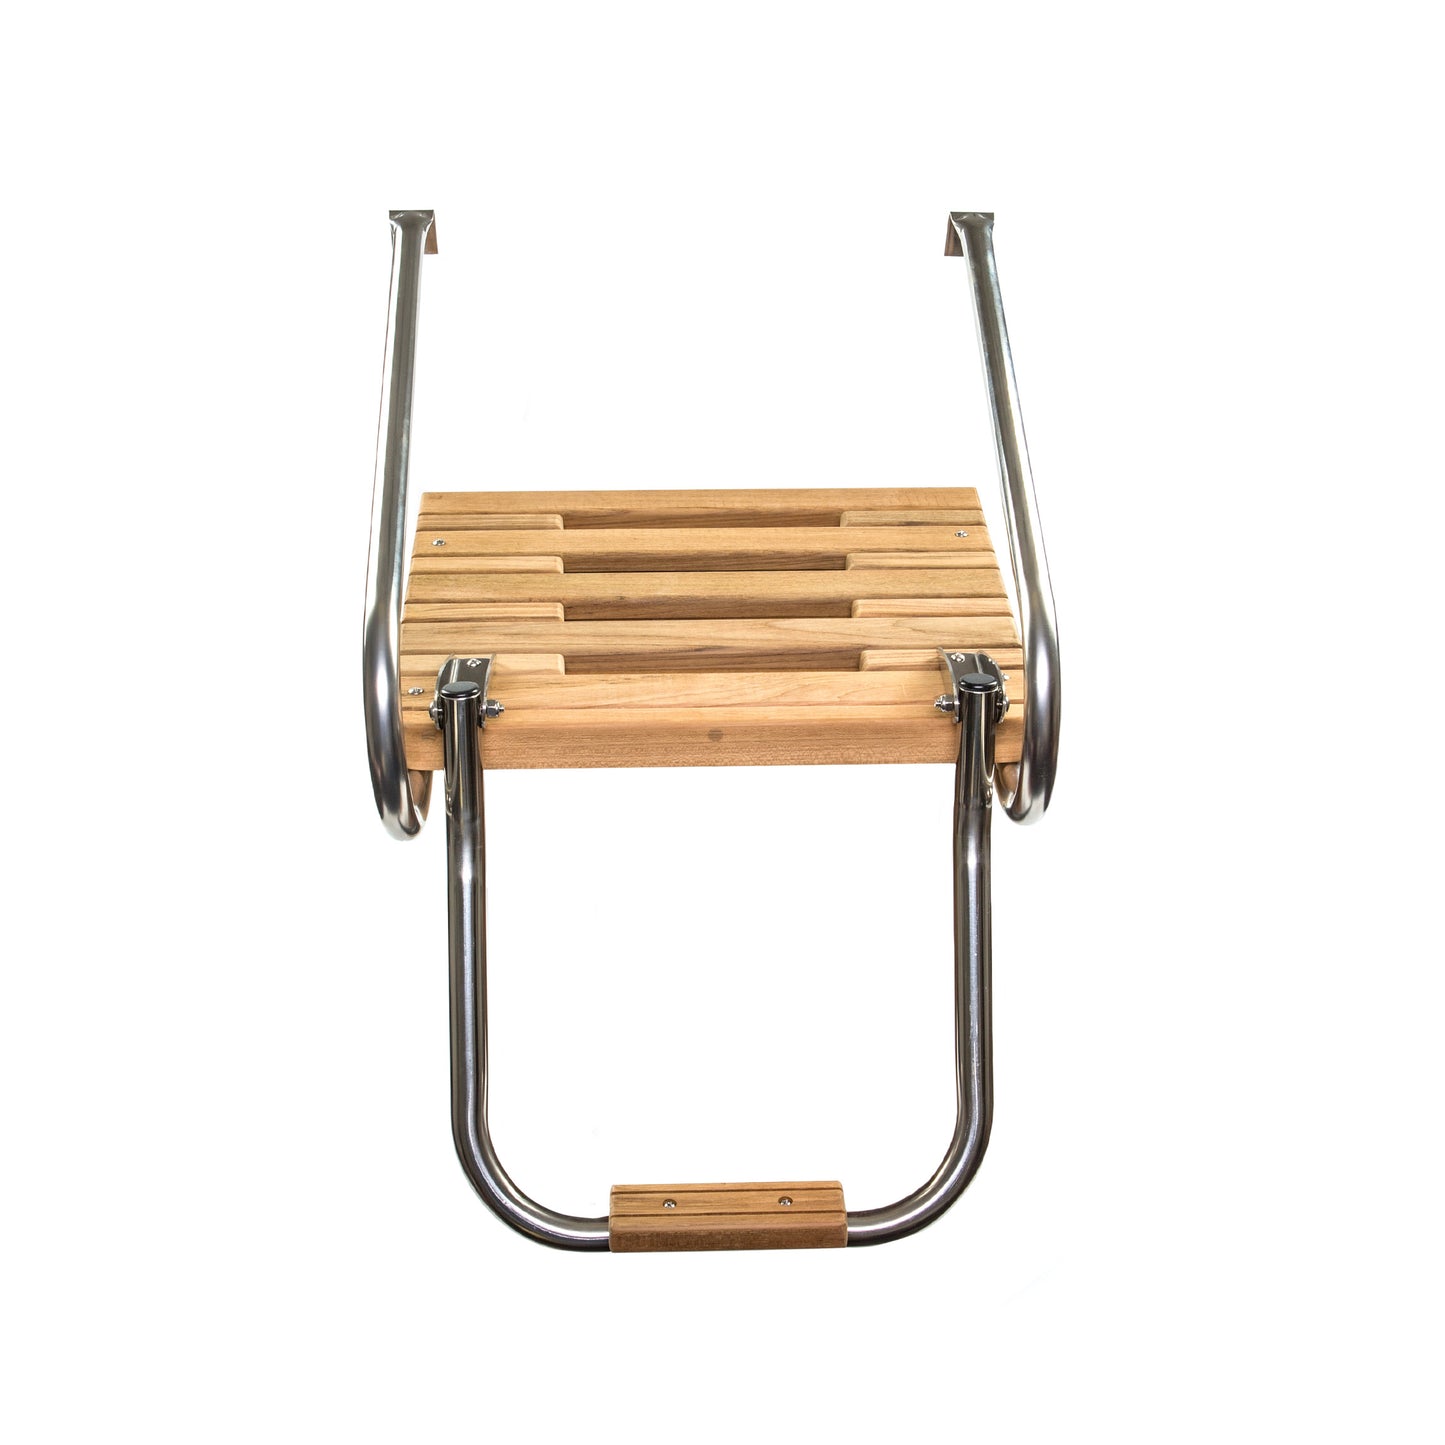 Inboard /Outboard Teak Swim Platforms with Ladder and Mounting Hardware